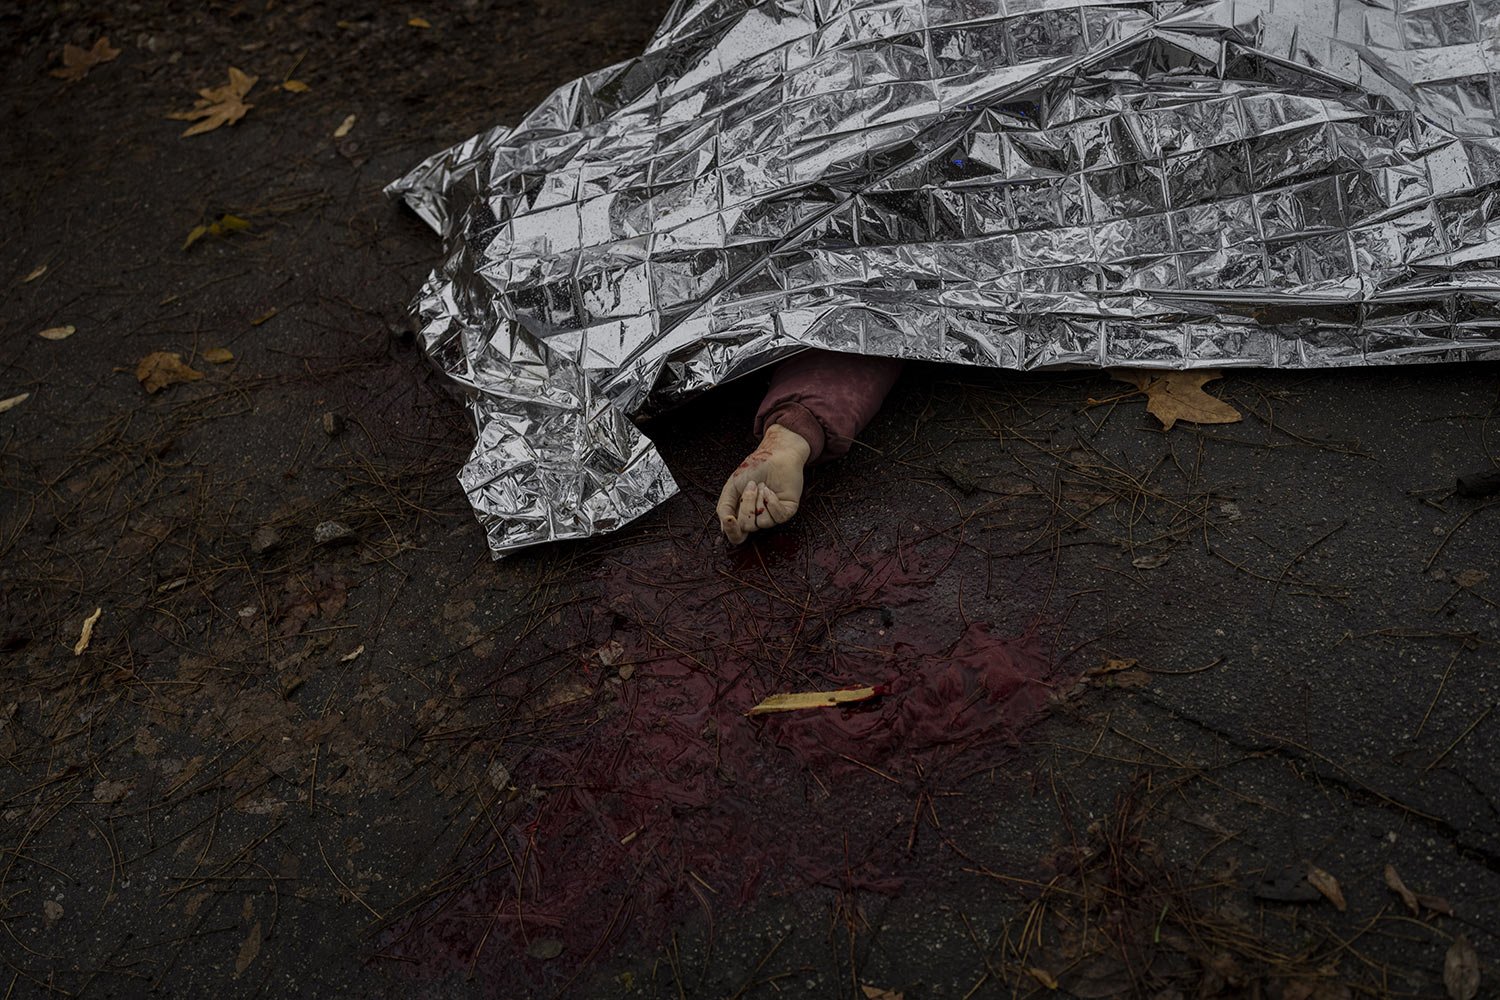  The body of a woman killed during a Russian attack is covered with an emergency blanket before being transported to the morgue in Kherson, southern Ukraine, Nov. 25, 2022. (AP Photo/Bernat Armangue) 